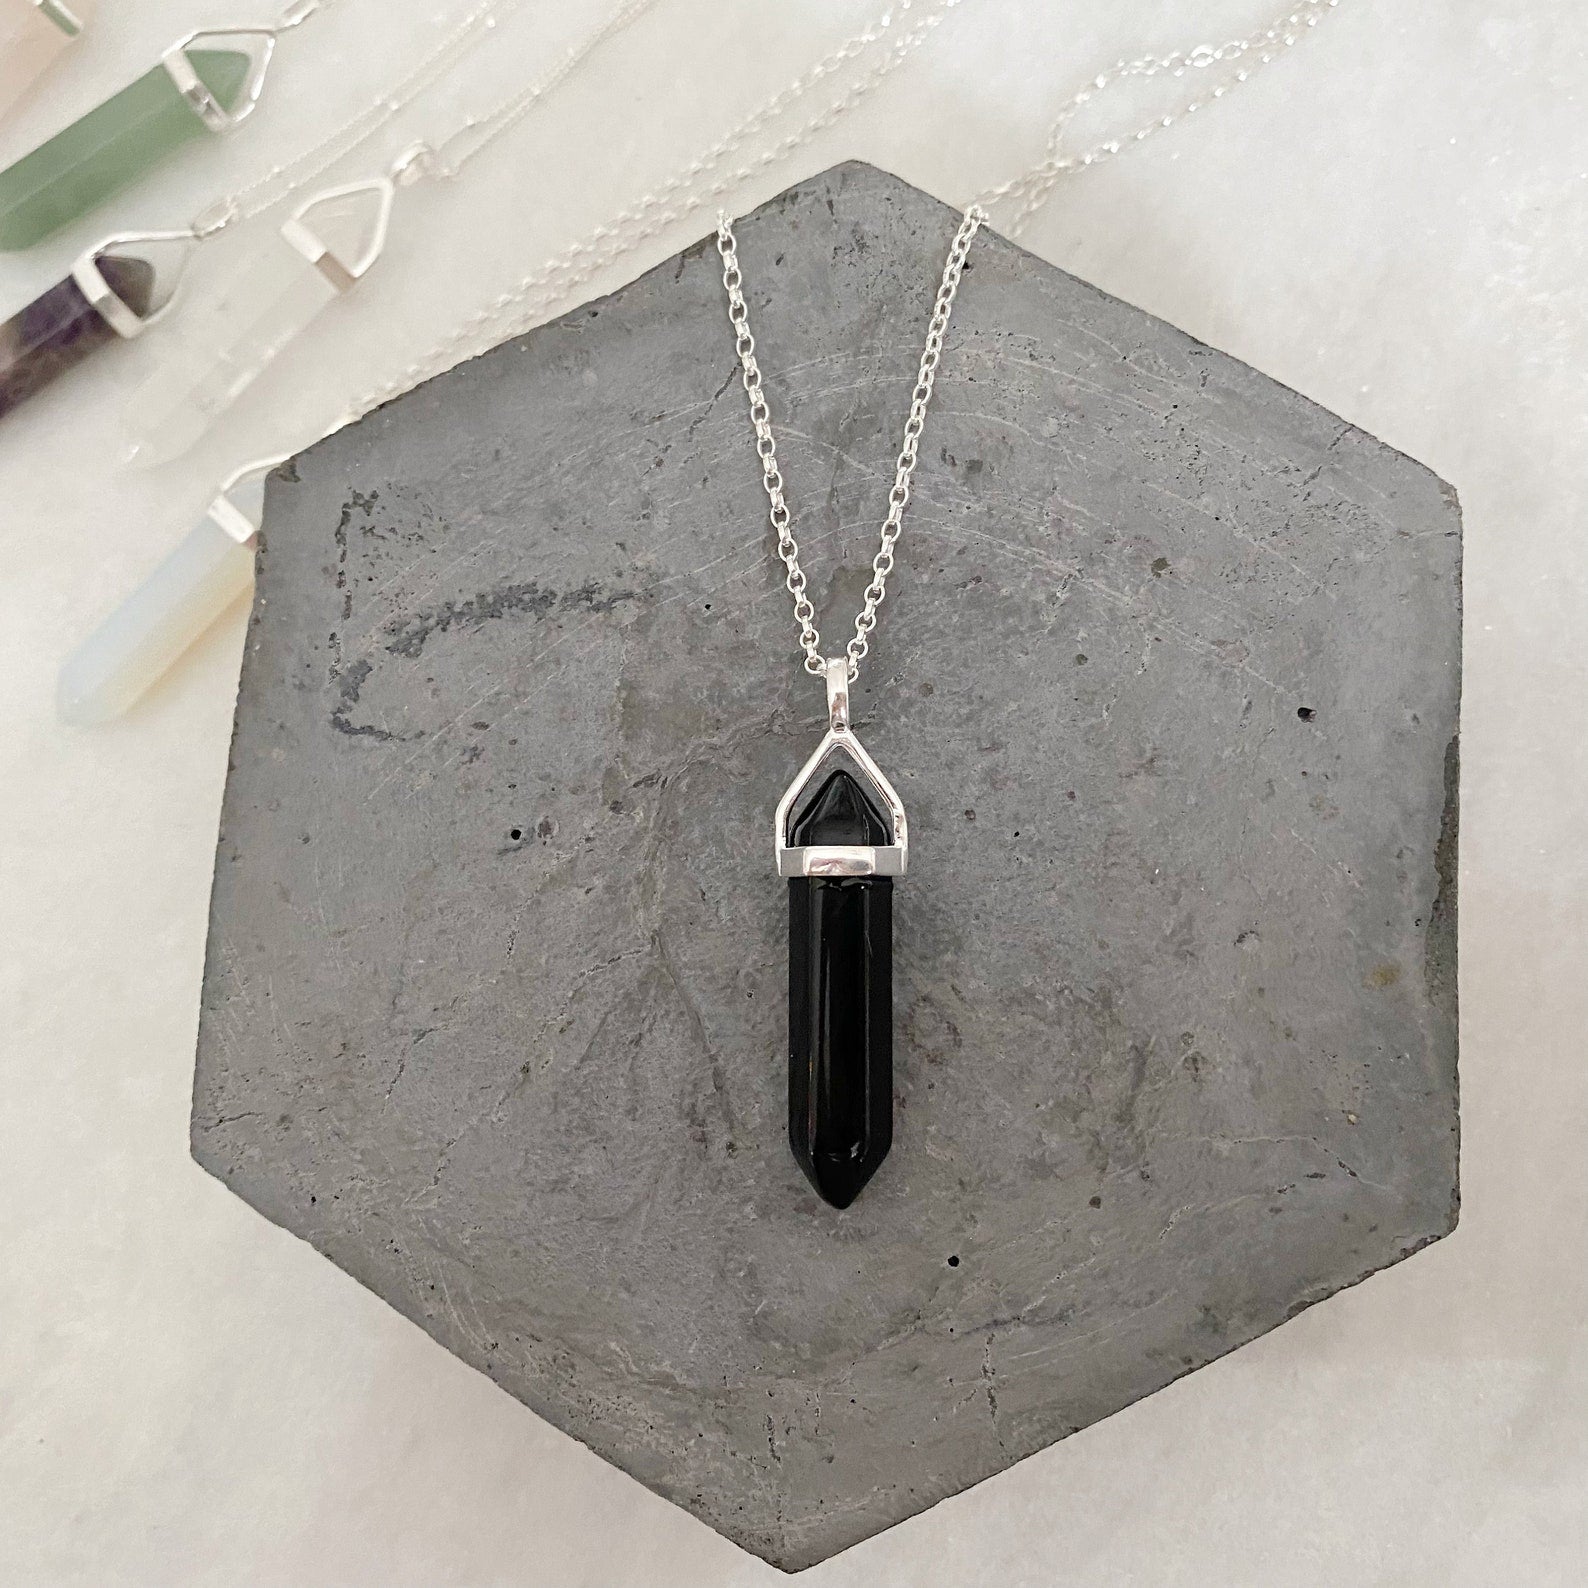 Natural healing stone necklace | Healing stone necklace pendants, Necklace, Stone  necklace